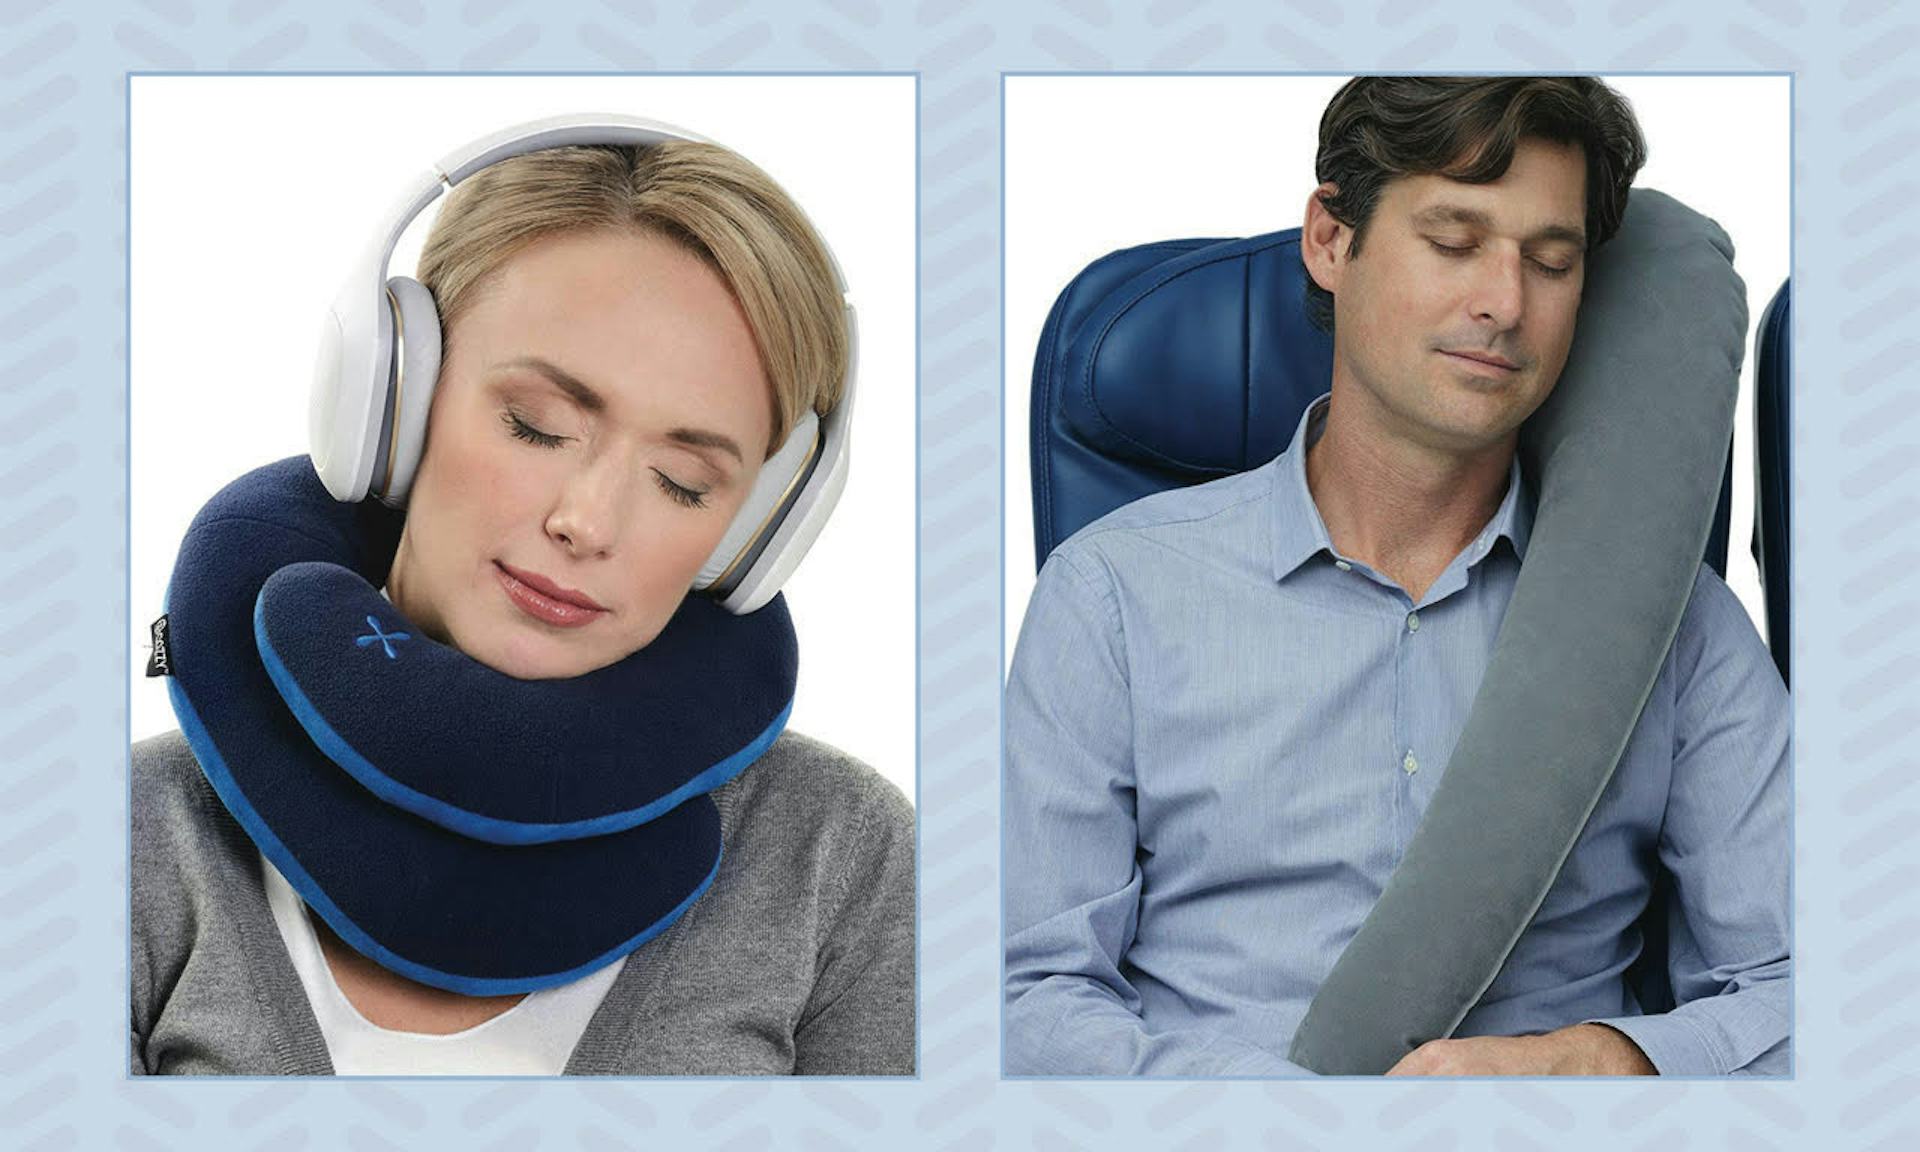 The 5 best neck pillows for travel